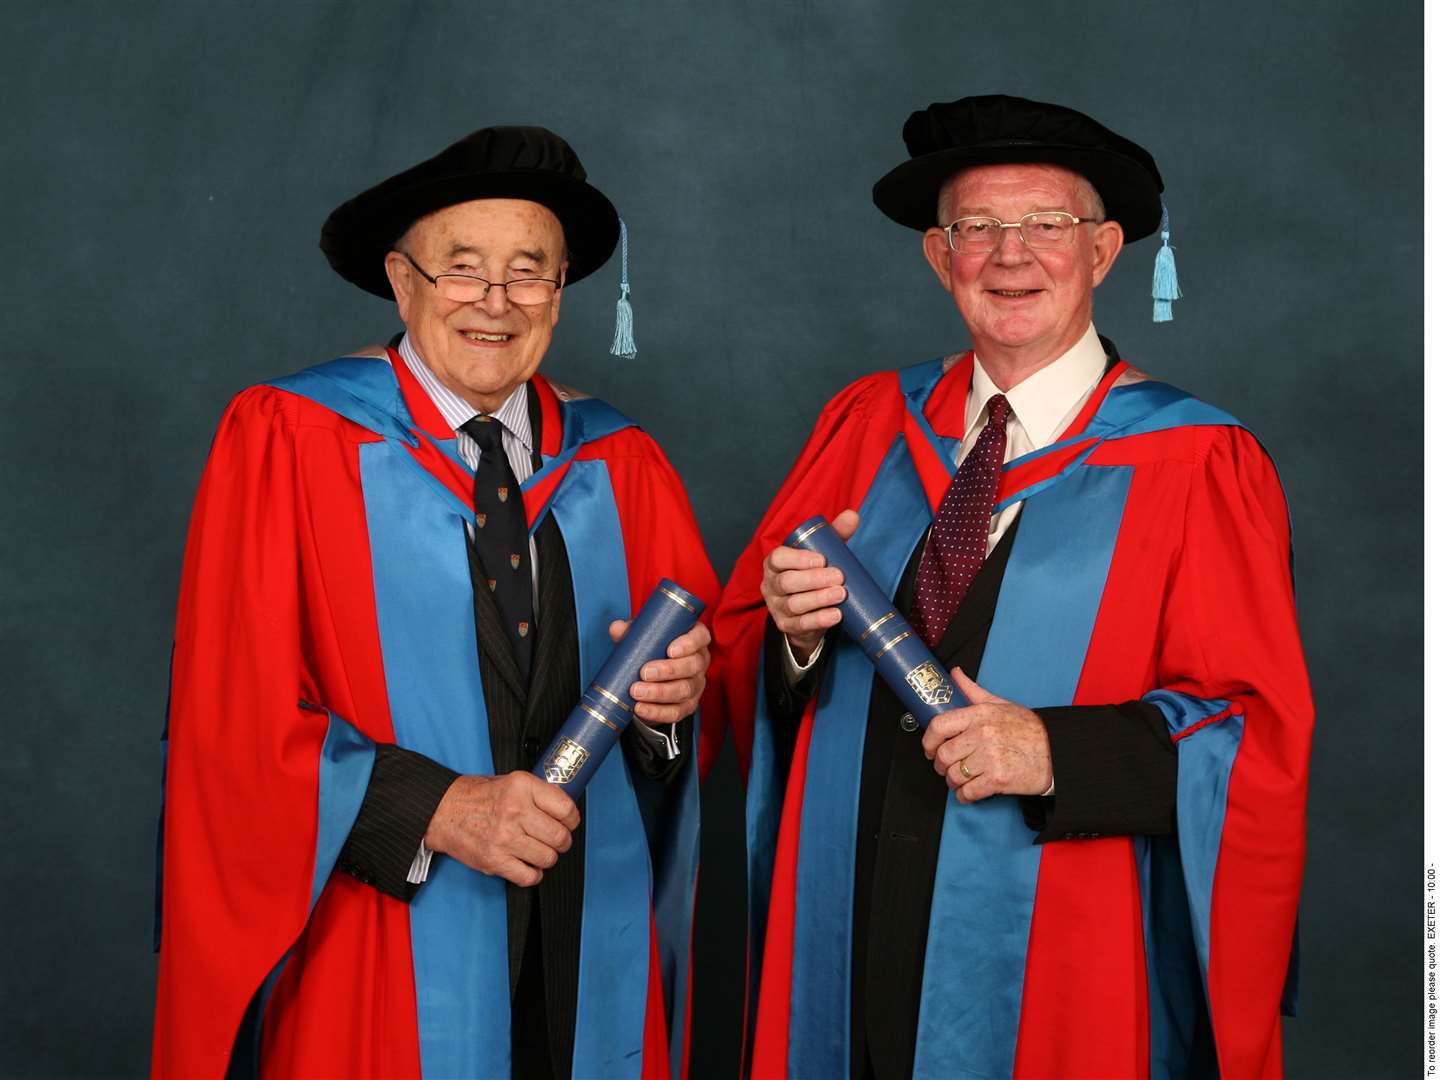 Hip creators Prof Robin Ling (left) and Dr Clive Lee received honorary degrees from the University of Exeter in 2009 (University of Exeter/PA)